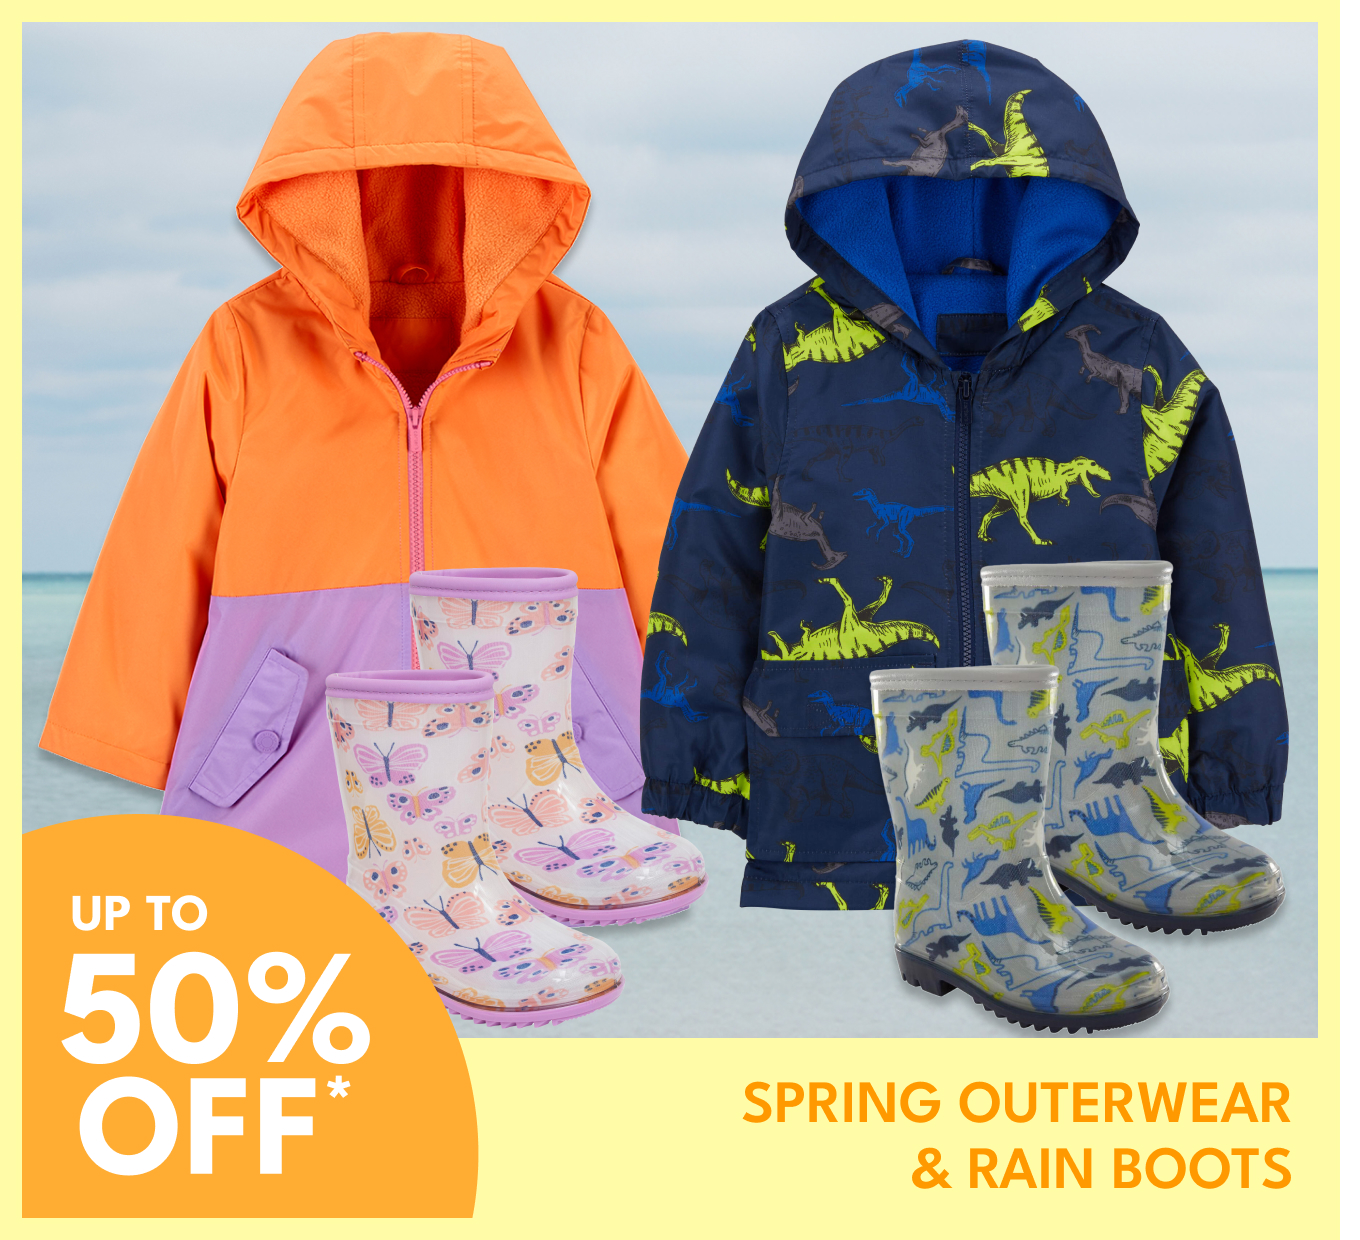 UP TO 50% OFF* | SPRING OUTERWEAR & RAIN BOOTS